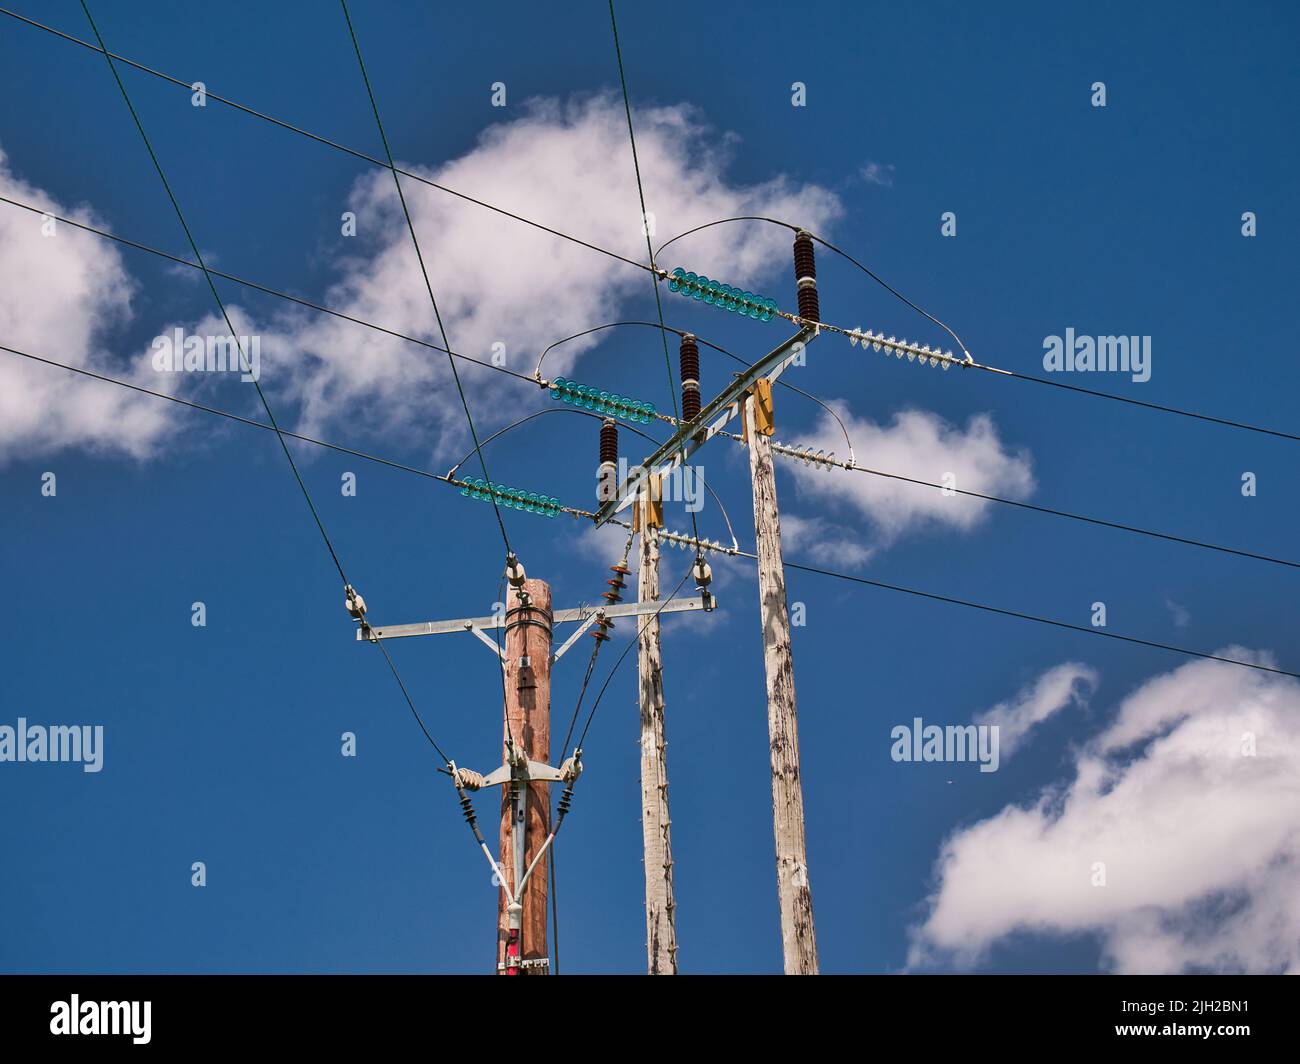 Two electricity supply pylons delivering power through the UK national grid showing power cables, isolators and other equipment. Taken on a sunny day Stock Photo